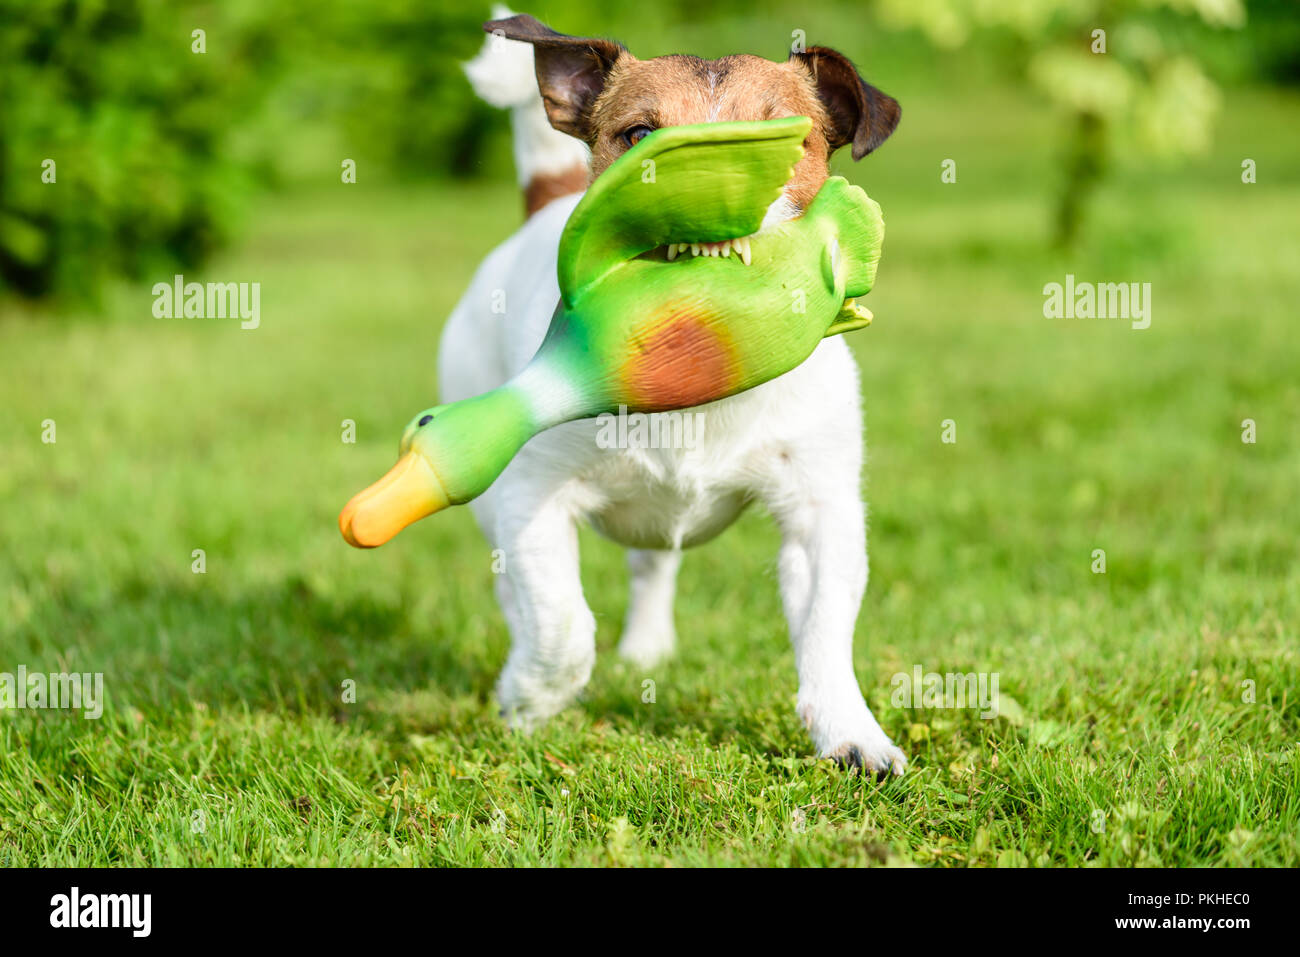 Hunting dog training to fetch game with toy duck shows teeth Stock Photo